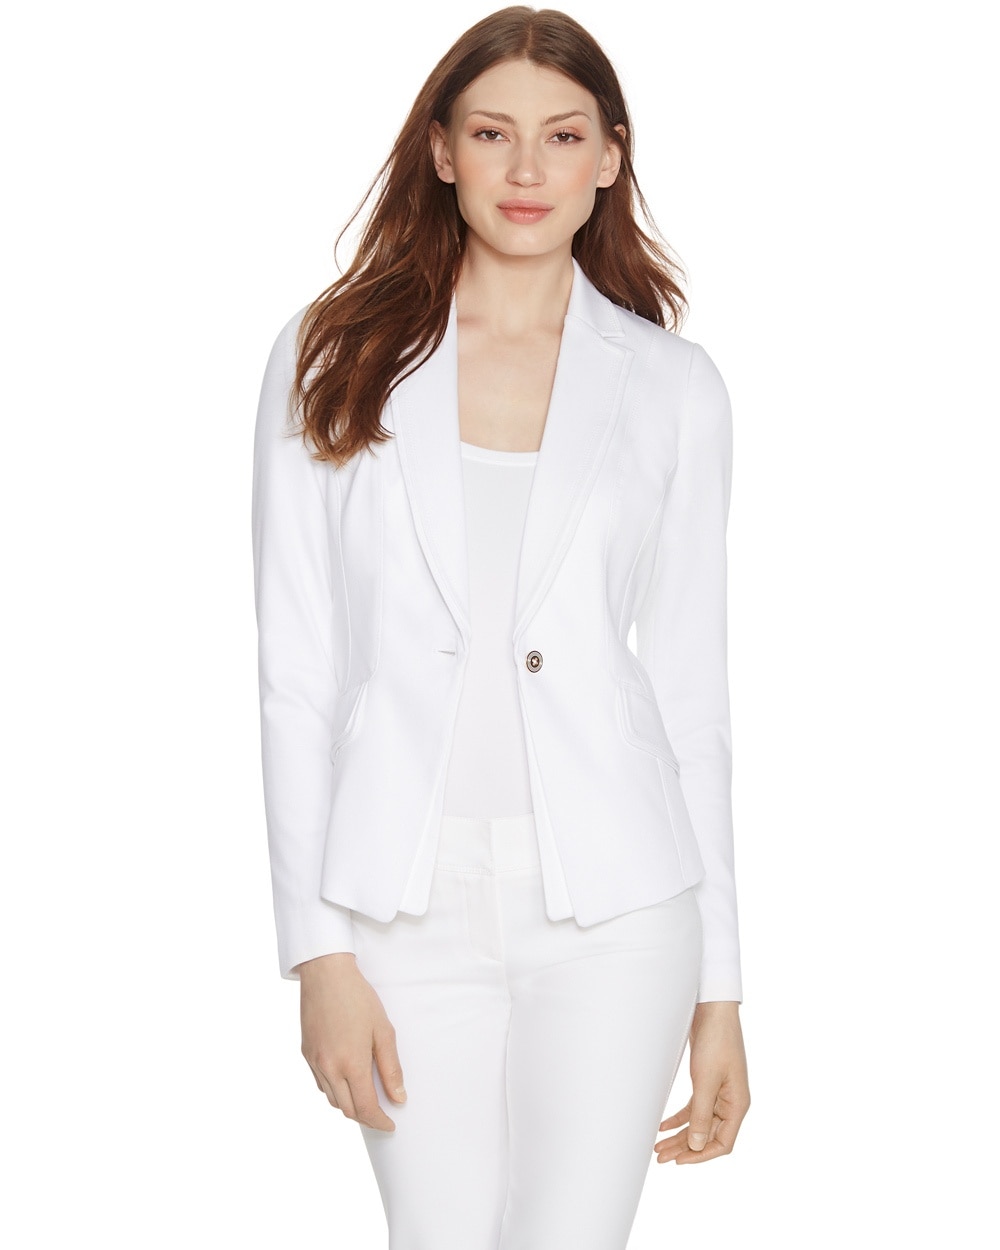 Long Sleeve White Cutaway Blazer video preview image, click to start video